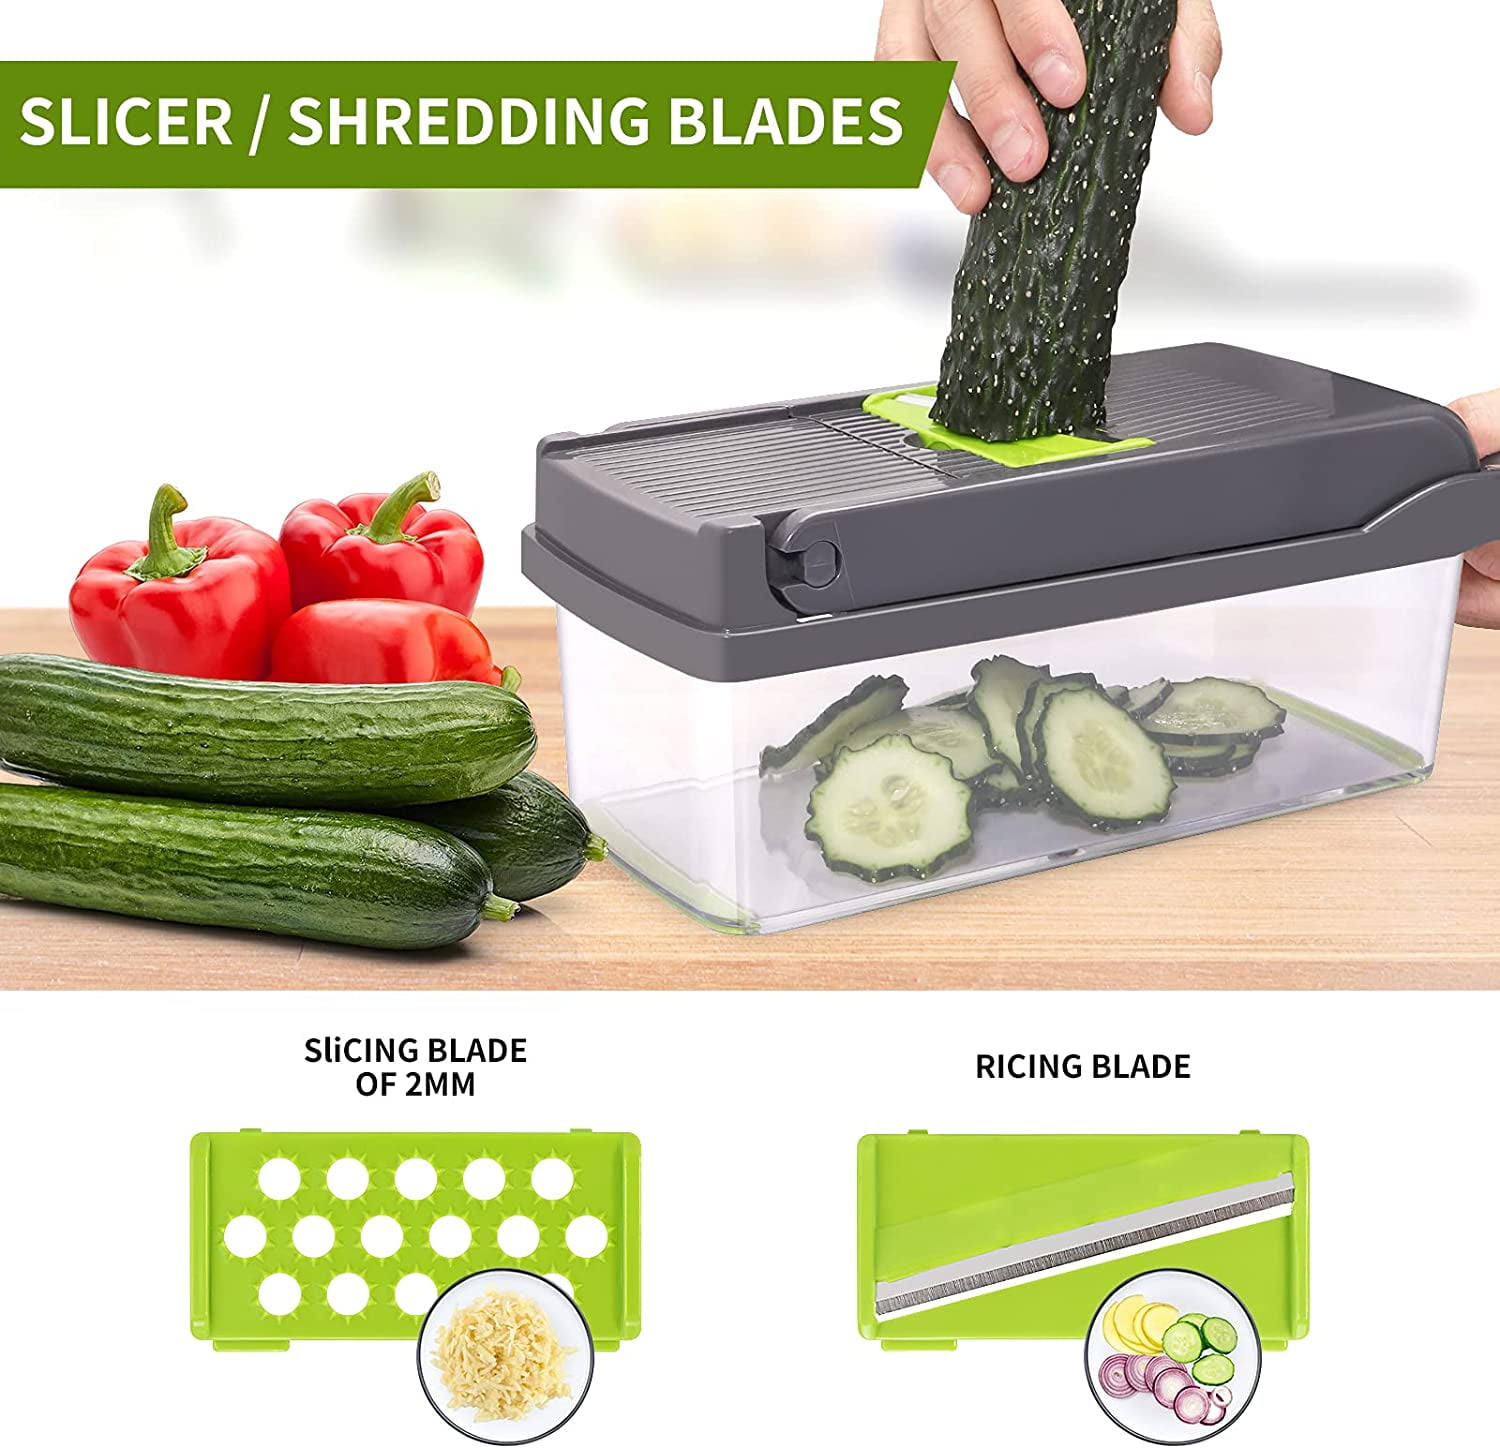 Dropship Vegetable Chopper, 14 In 1 Mandoline Slicer Multi-Function  Kitchen, 7 Replaceable Stainless Steel Vegetable Cutter With Egg Separator  Hand Guard Julienne Grater For Onion Potato Fruit to Sell Online at a